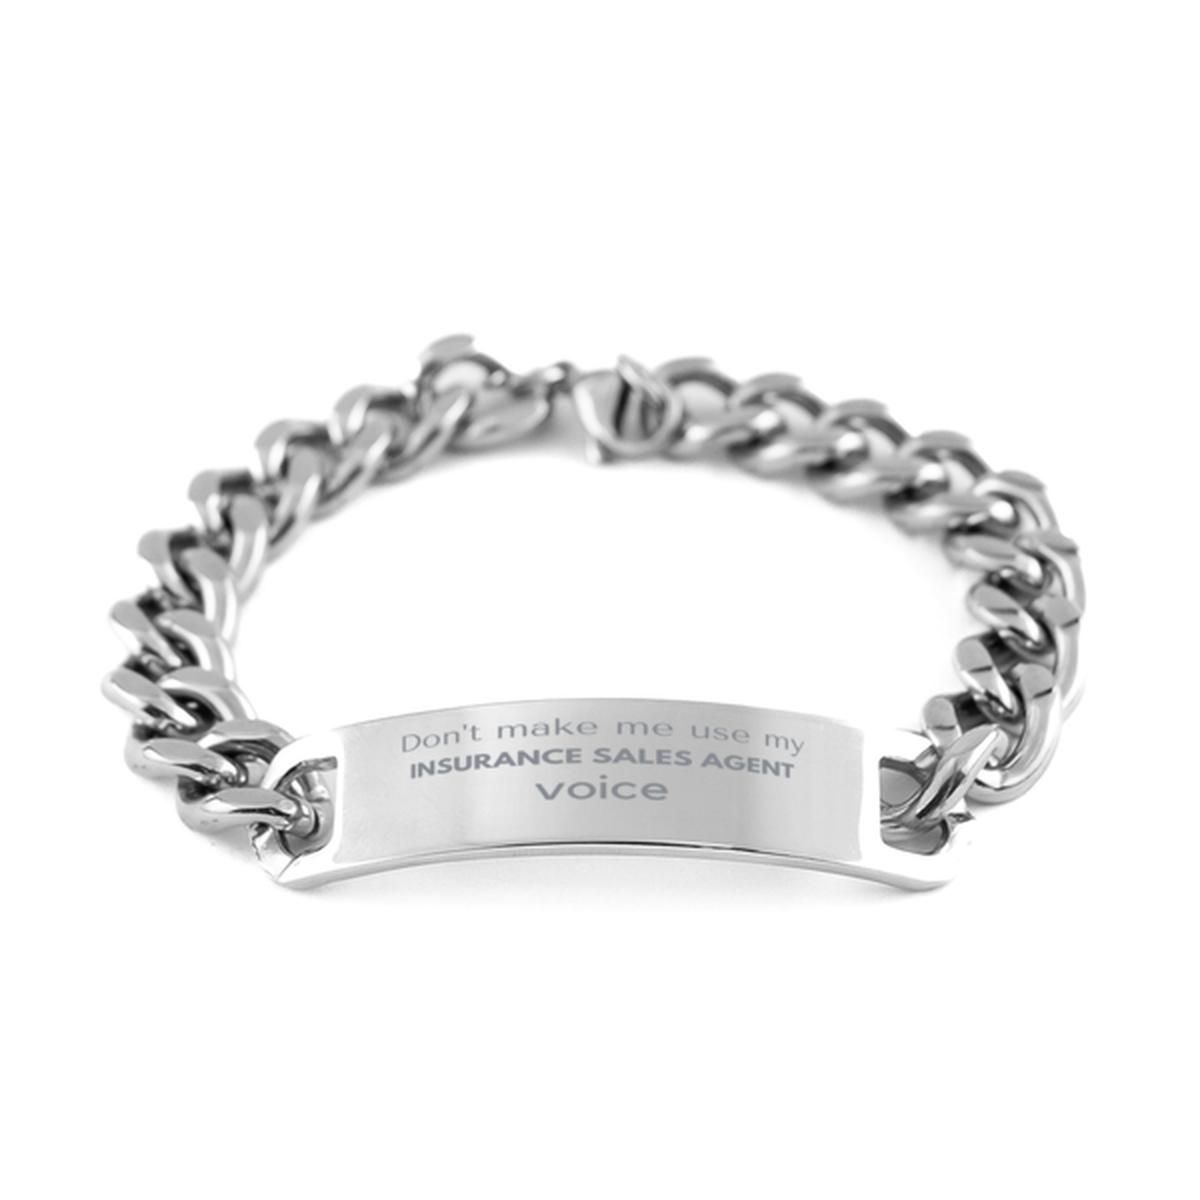 Don't make me use my Insurance Sales Agent voice, Sarcasm Insurance Sales Agent Gifts, Christmas Insurance Sales Agent Cuban Chain Stainless Steel Bracelet Birthday Unique Gifts For Insurance Sales Agent Coworkers, Men, Women, Colleague, Friends